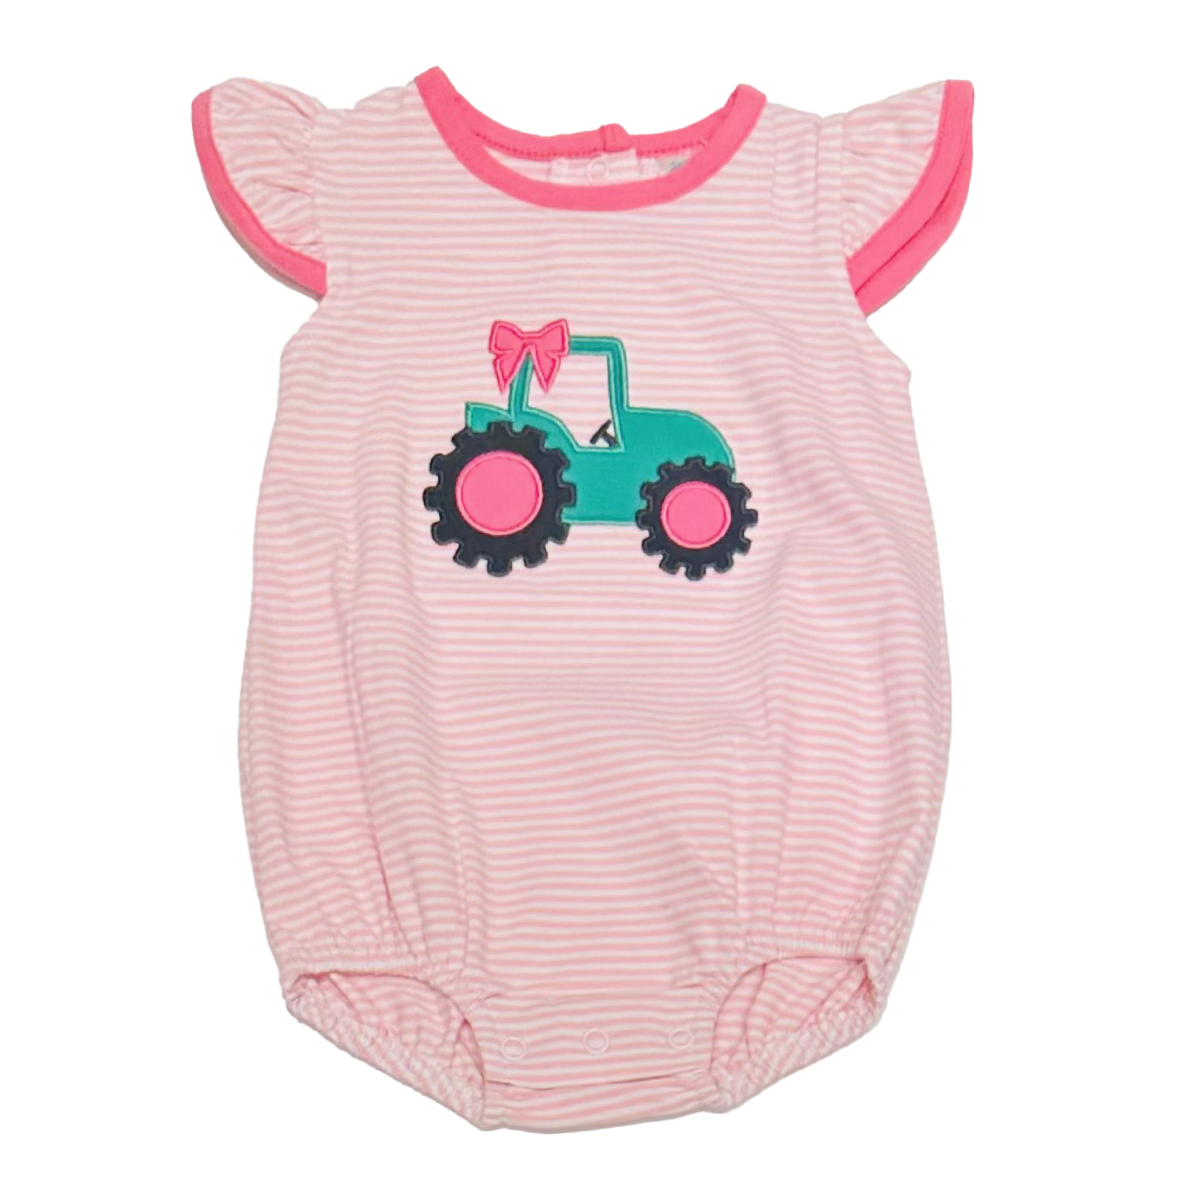 Baby Girl's Appliqued Tractor Knit Pink Stripe Summer Bubble